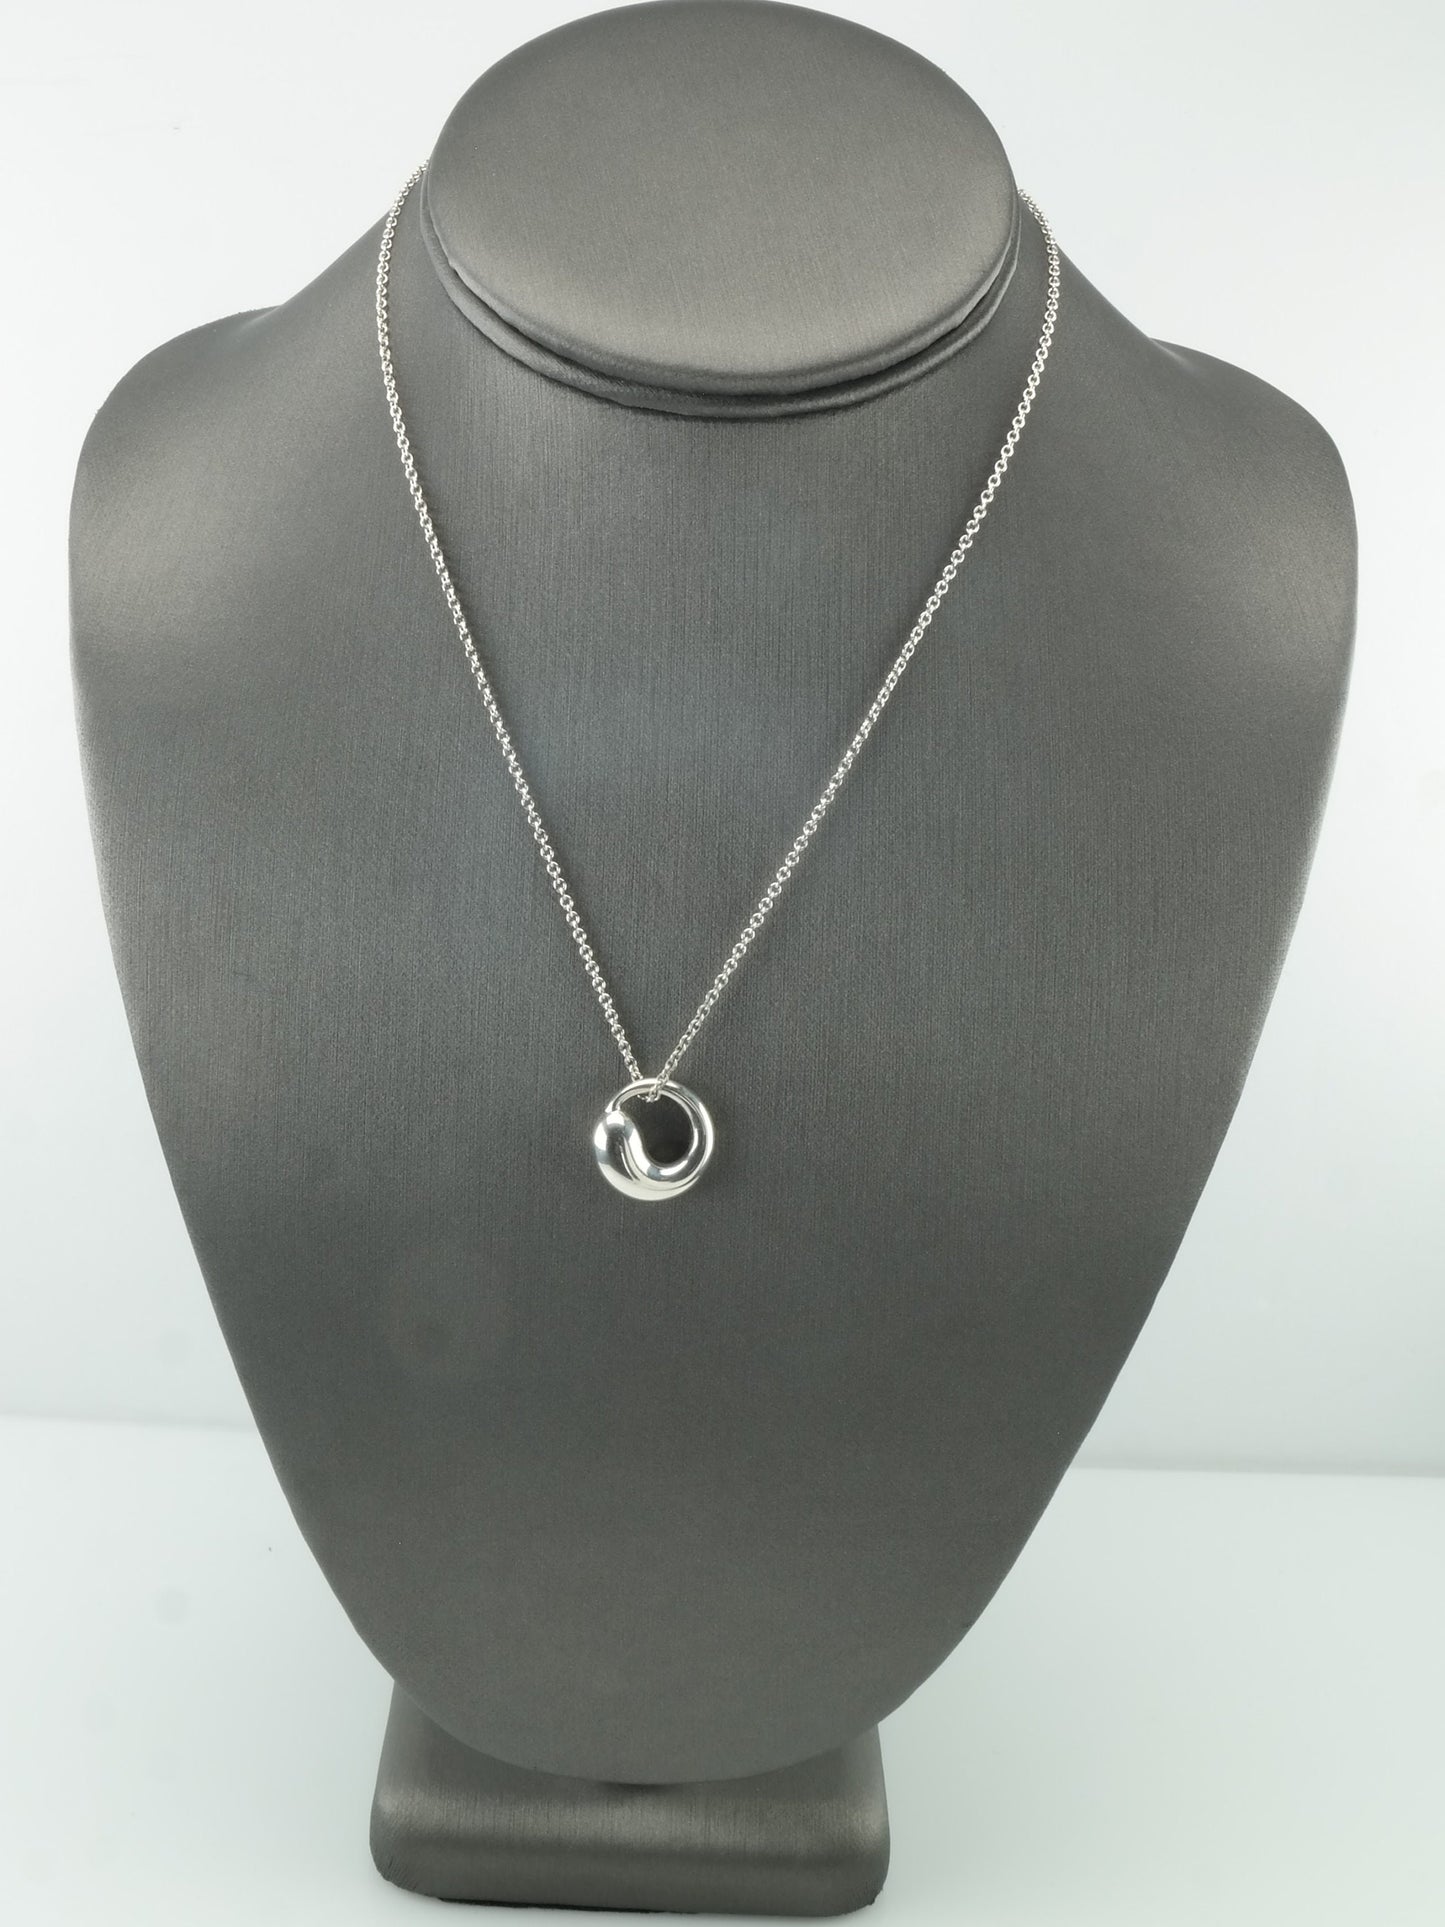 Vintage Tiffany & Co Sterling Silver 15mm, Medium Eternal Circle Necklace